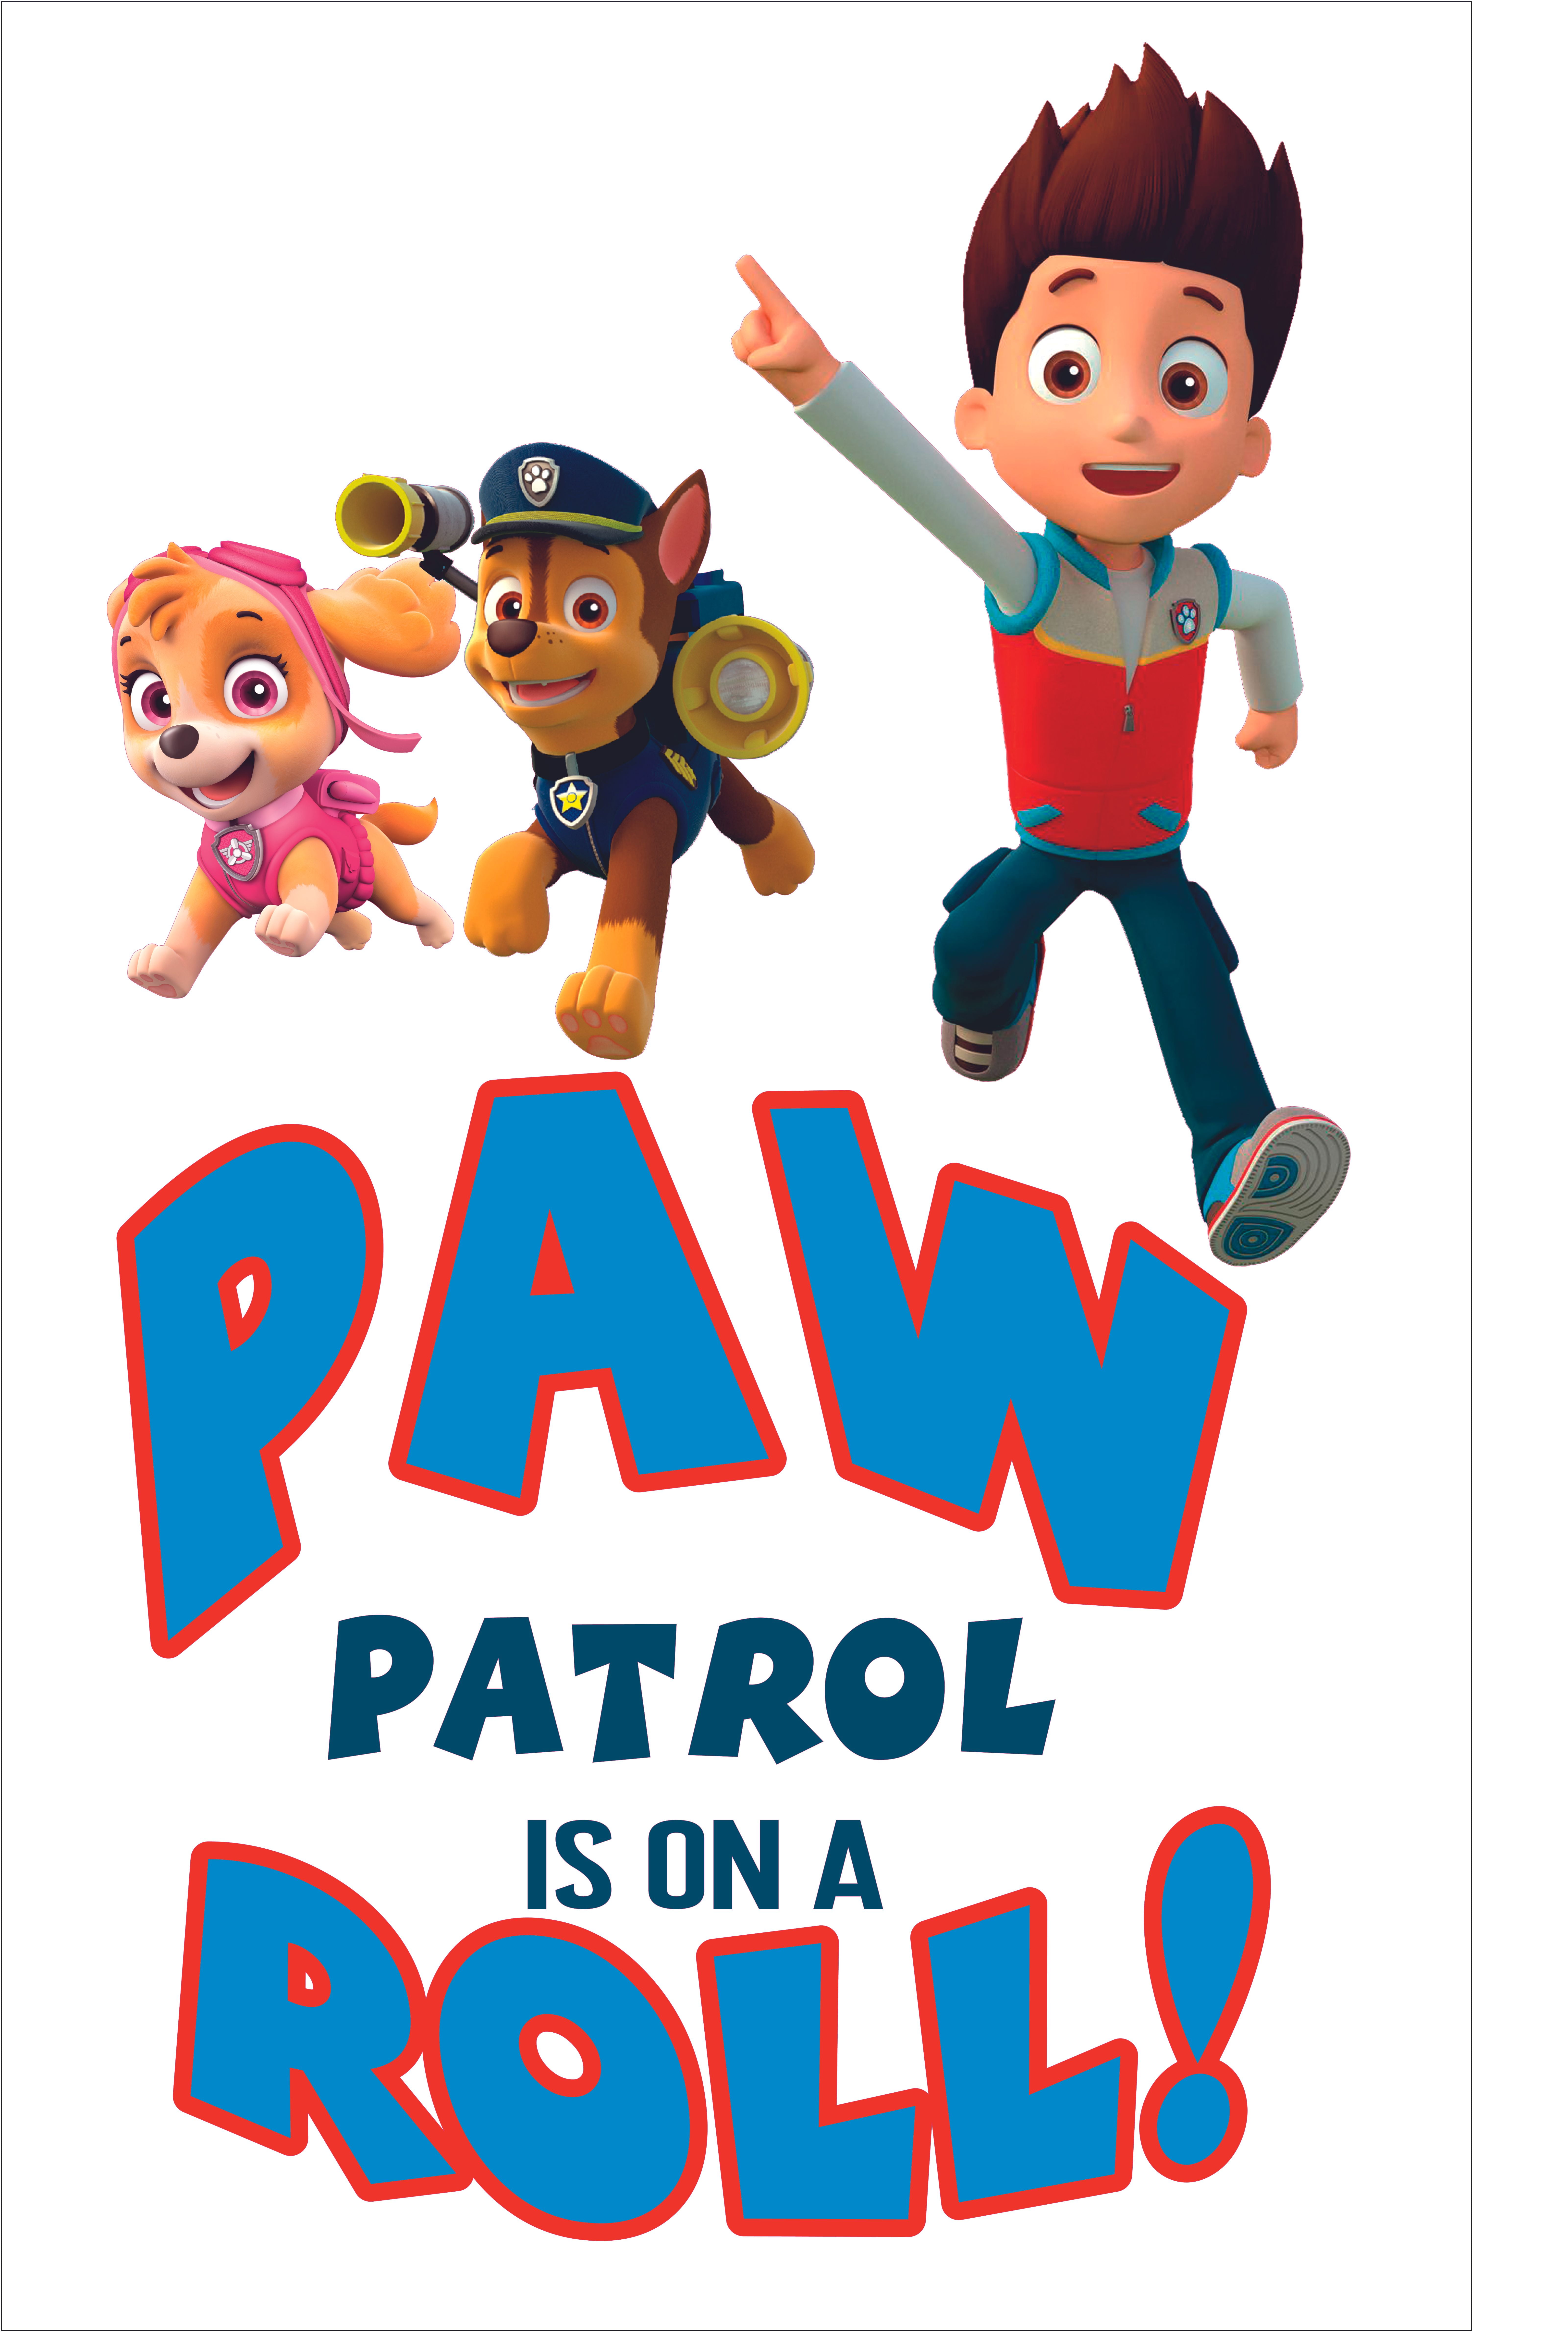 JUNGLE PAW PATROL GiAnT WALL DECALS Dogs Puppies Room Decor Stickers Ryder Chase 